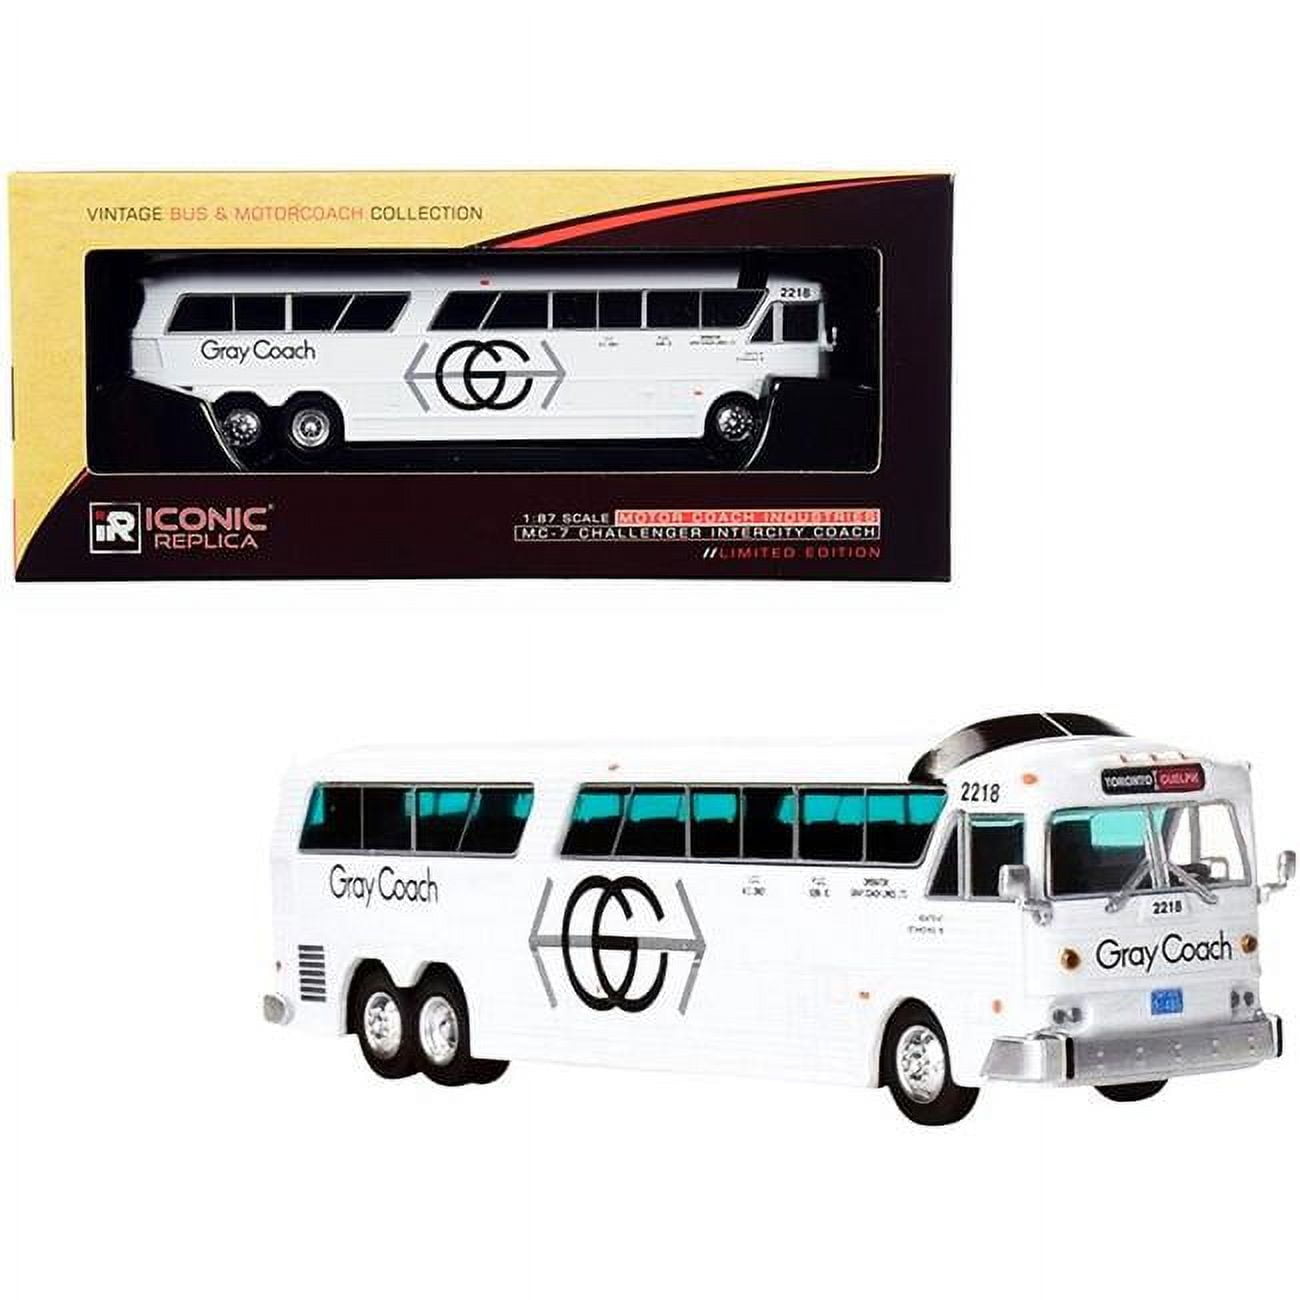 Picture of Iconic Replicas 87-0270 1-87 HO Diecast Model for MCI MC-7 Challenger Intercity Coach Bus White Gray Coach Toronto - Guelph Vintage Bus & Motorcoach Collection